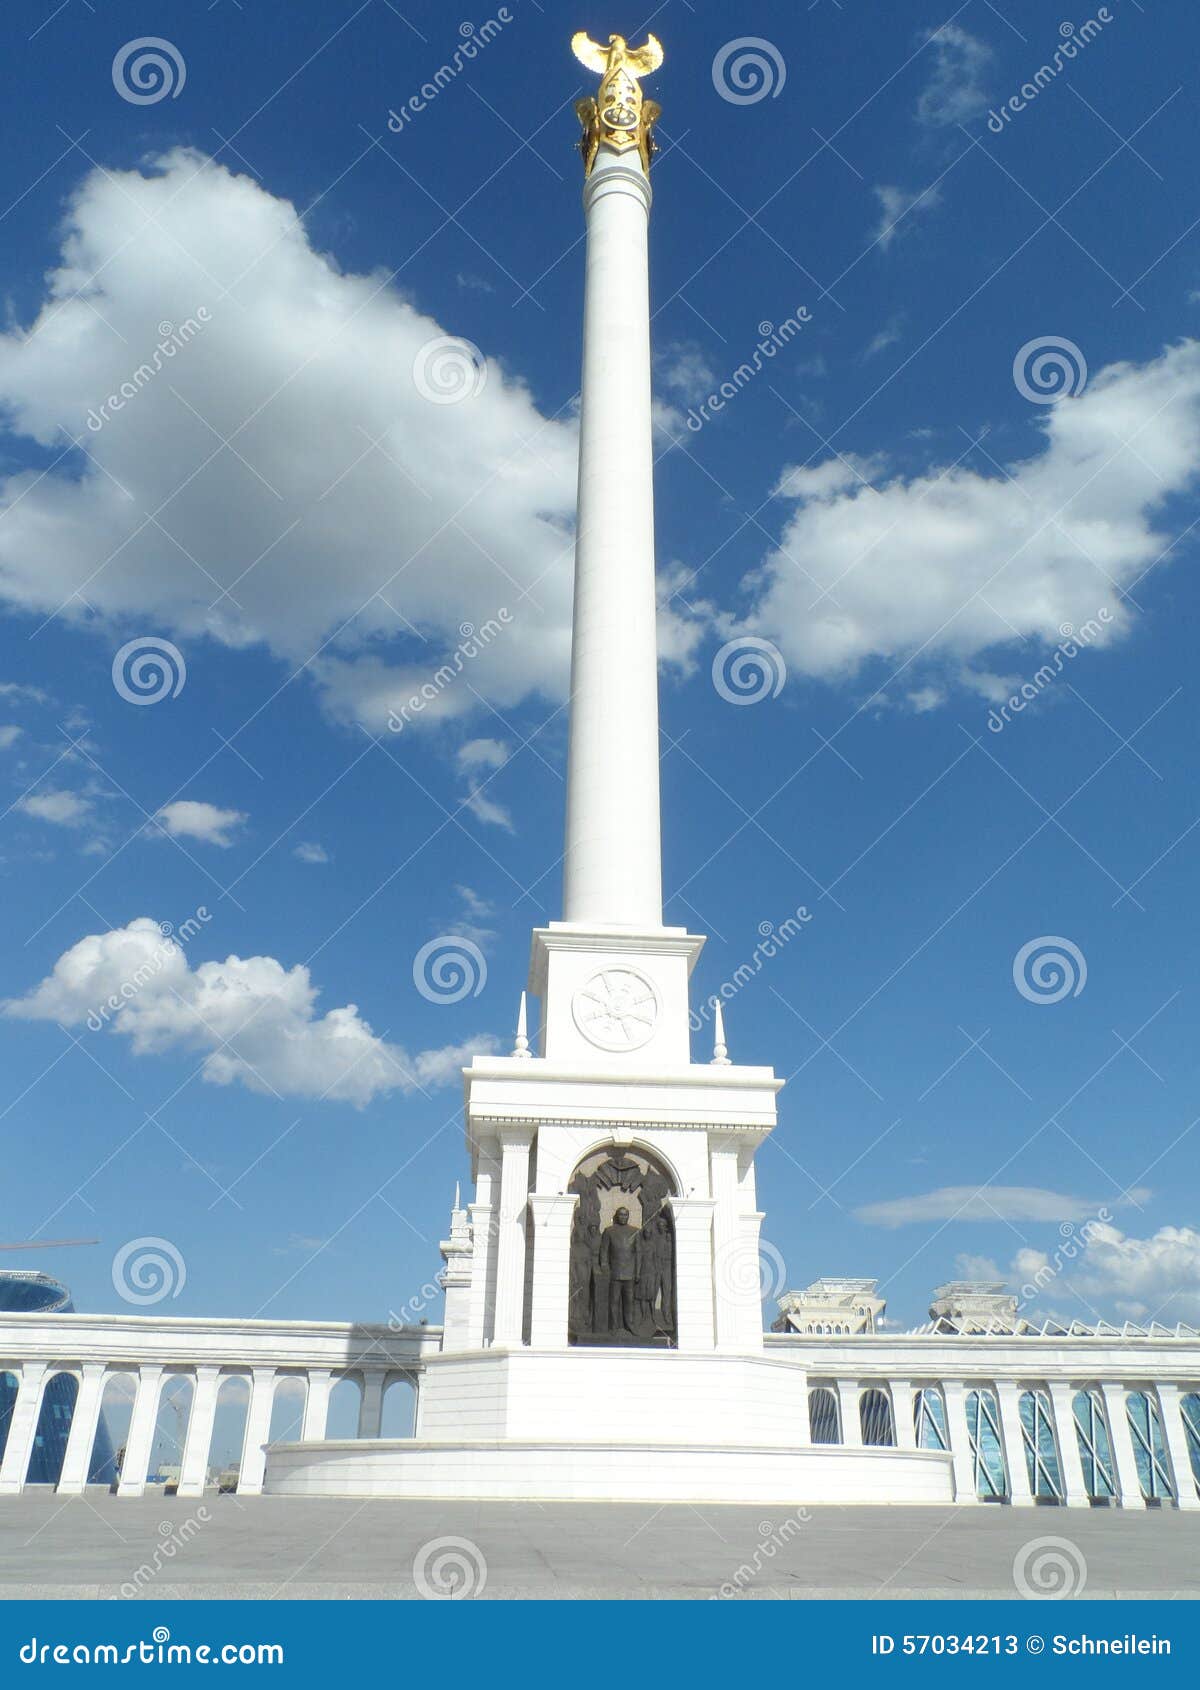 Astana, President s Monument; high column with decoration on the top